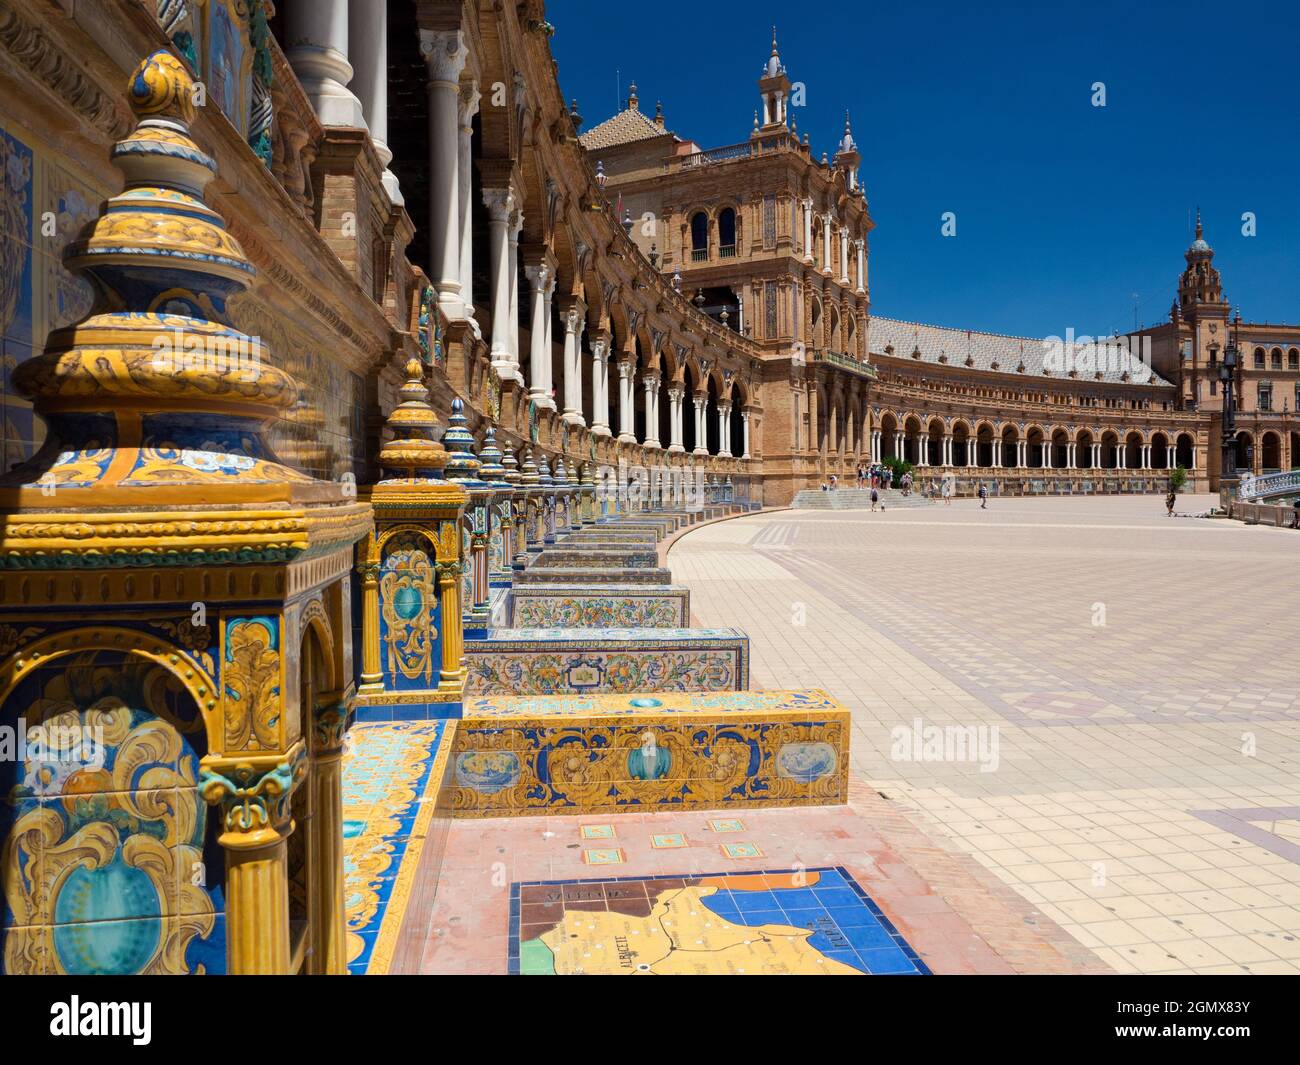 Seville, Andalucia, Spain - 31 May 2016; no people in view. Located in the Parque de Mar’a Luisa in Seville, Spain, the grandiose Plaza de Espa–a was Stock Photo